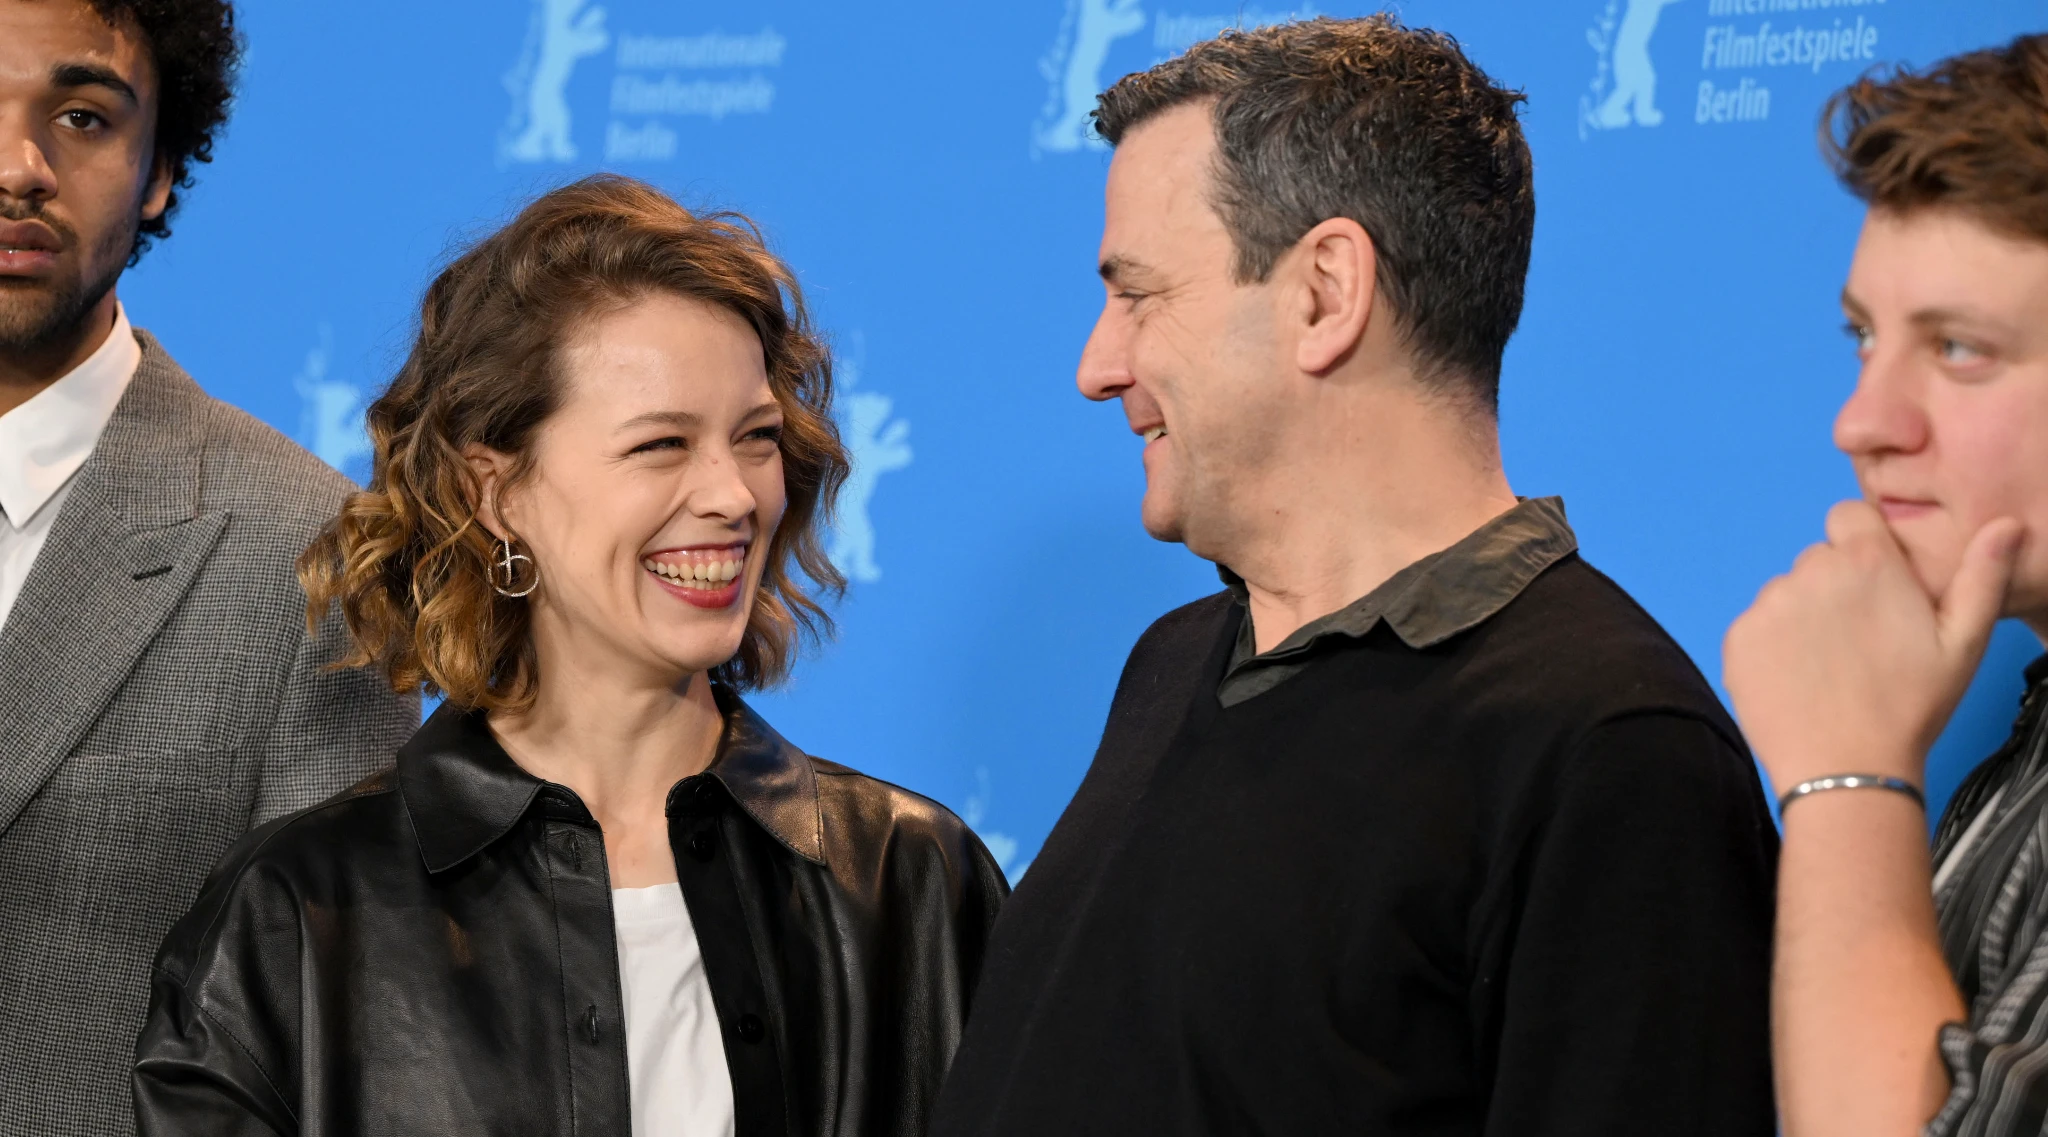 Christian Petzold and Paula Beer on What Makes Their Creative Partnership So Fruitful (Exclusive)